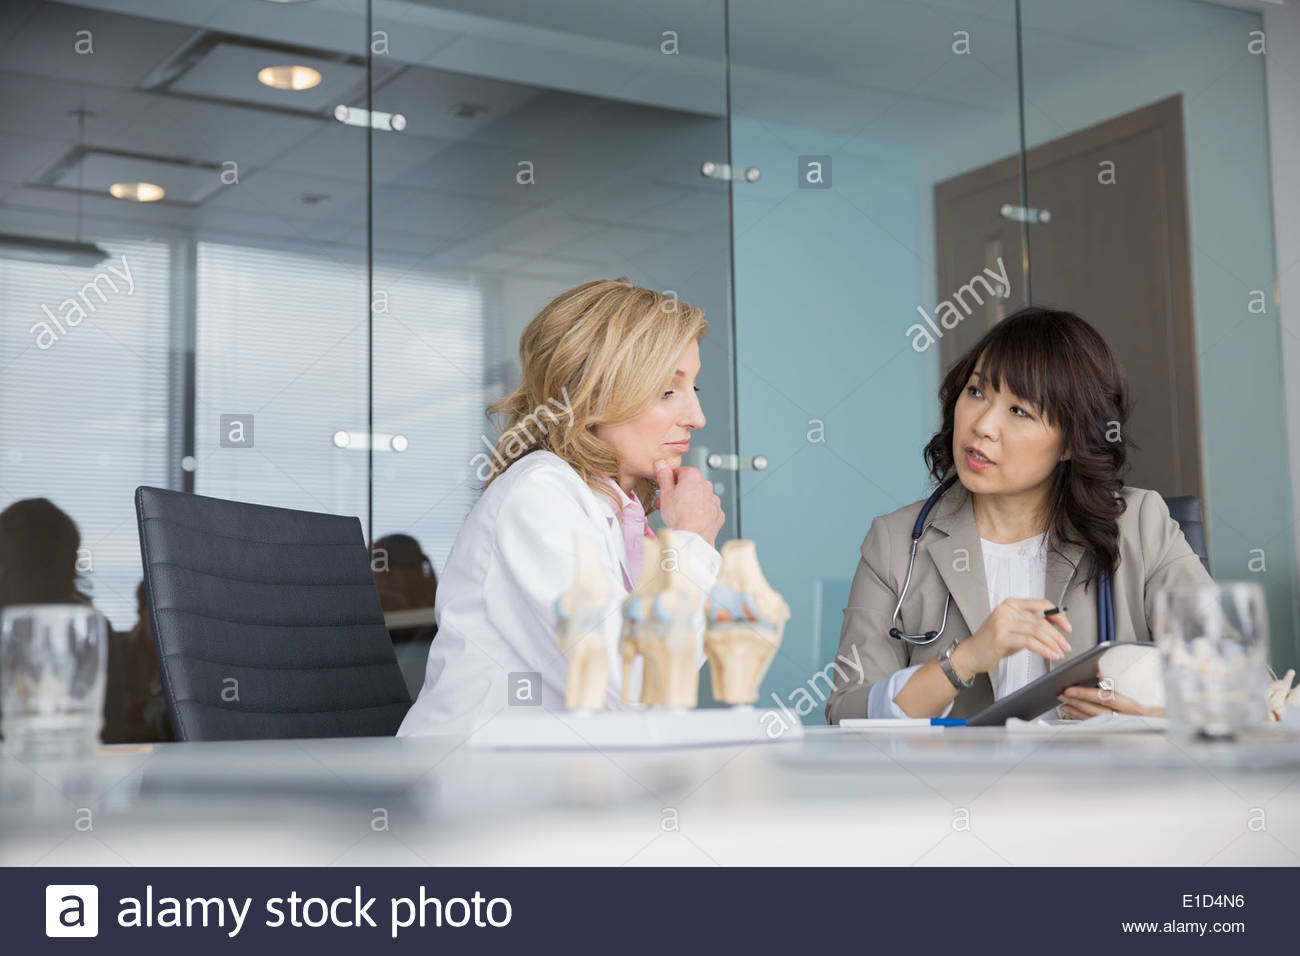 Doctors meeting in conference room Stock Photo